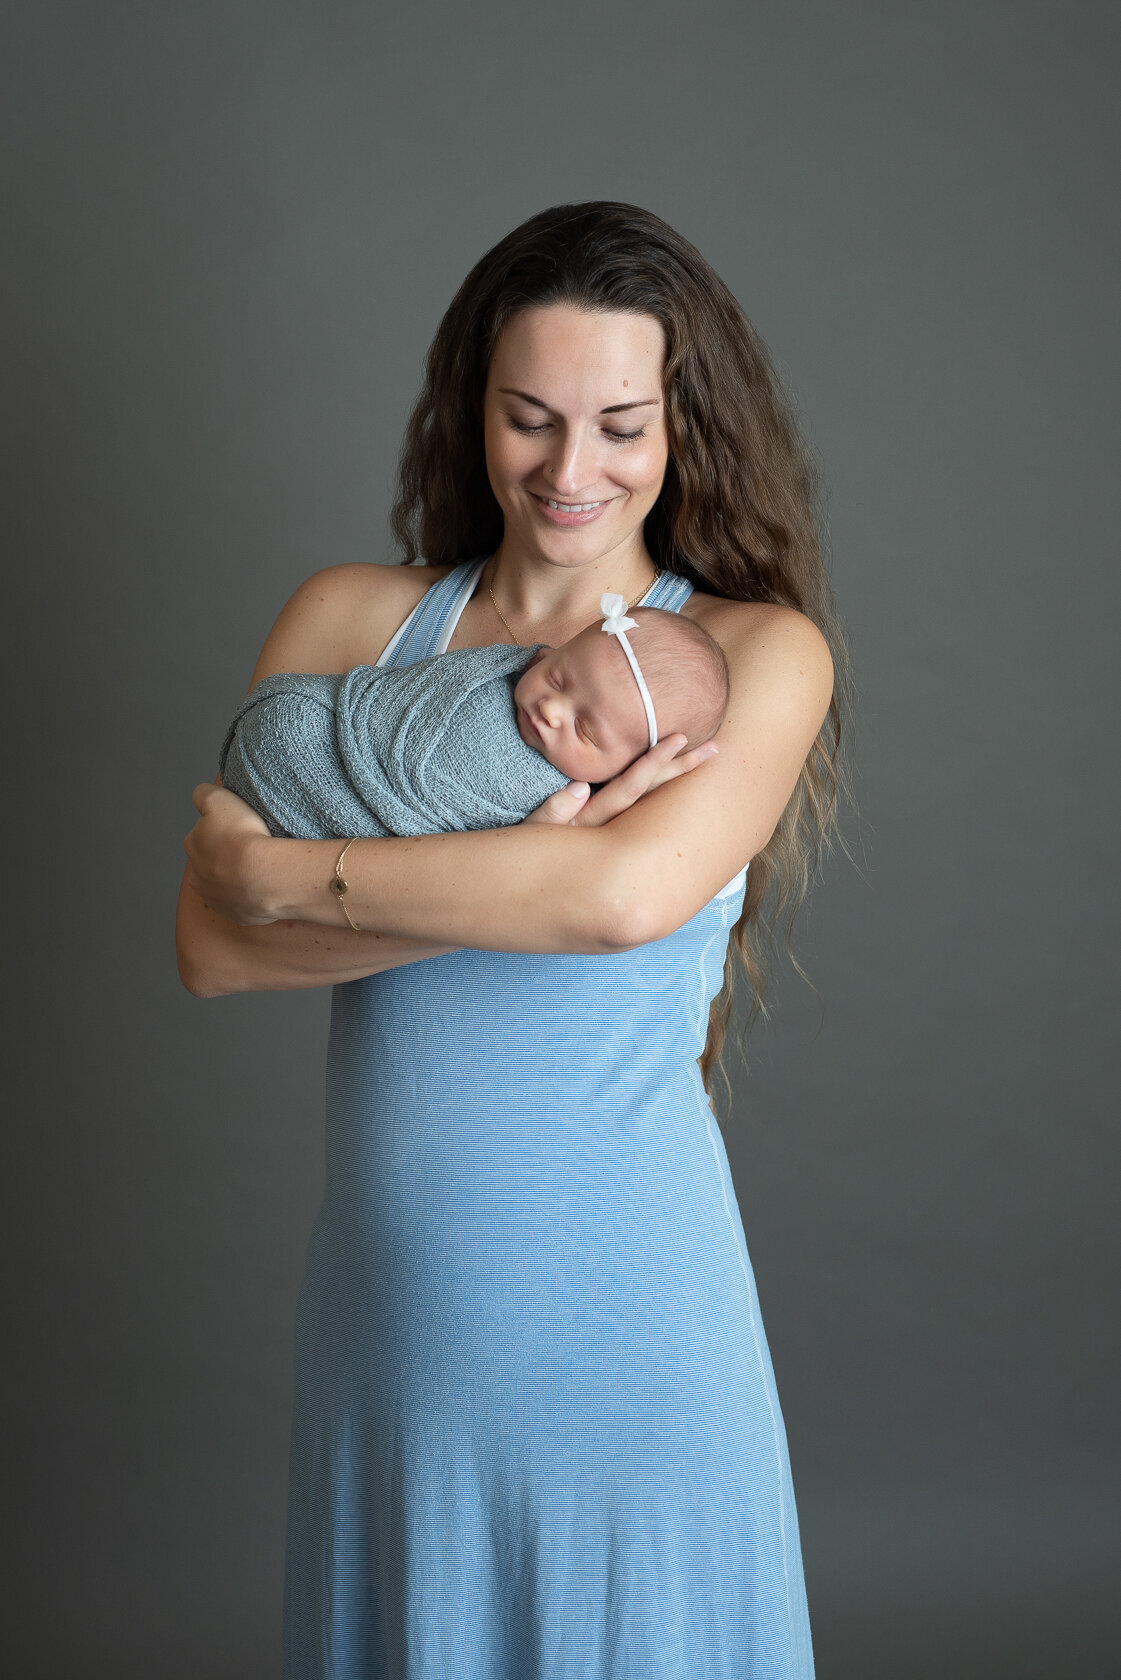 Newborn and Mom Portrait by Laura King Photography located in Houston